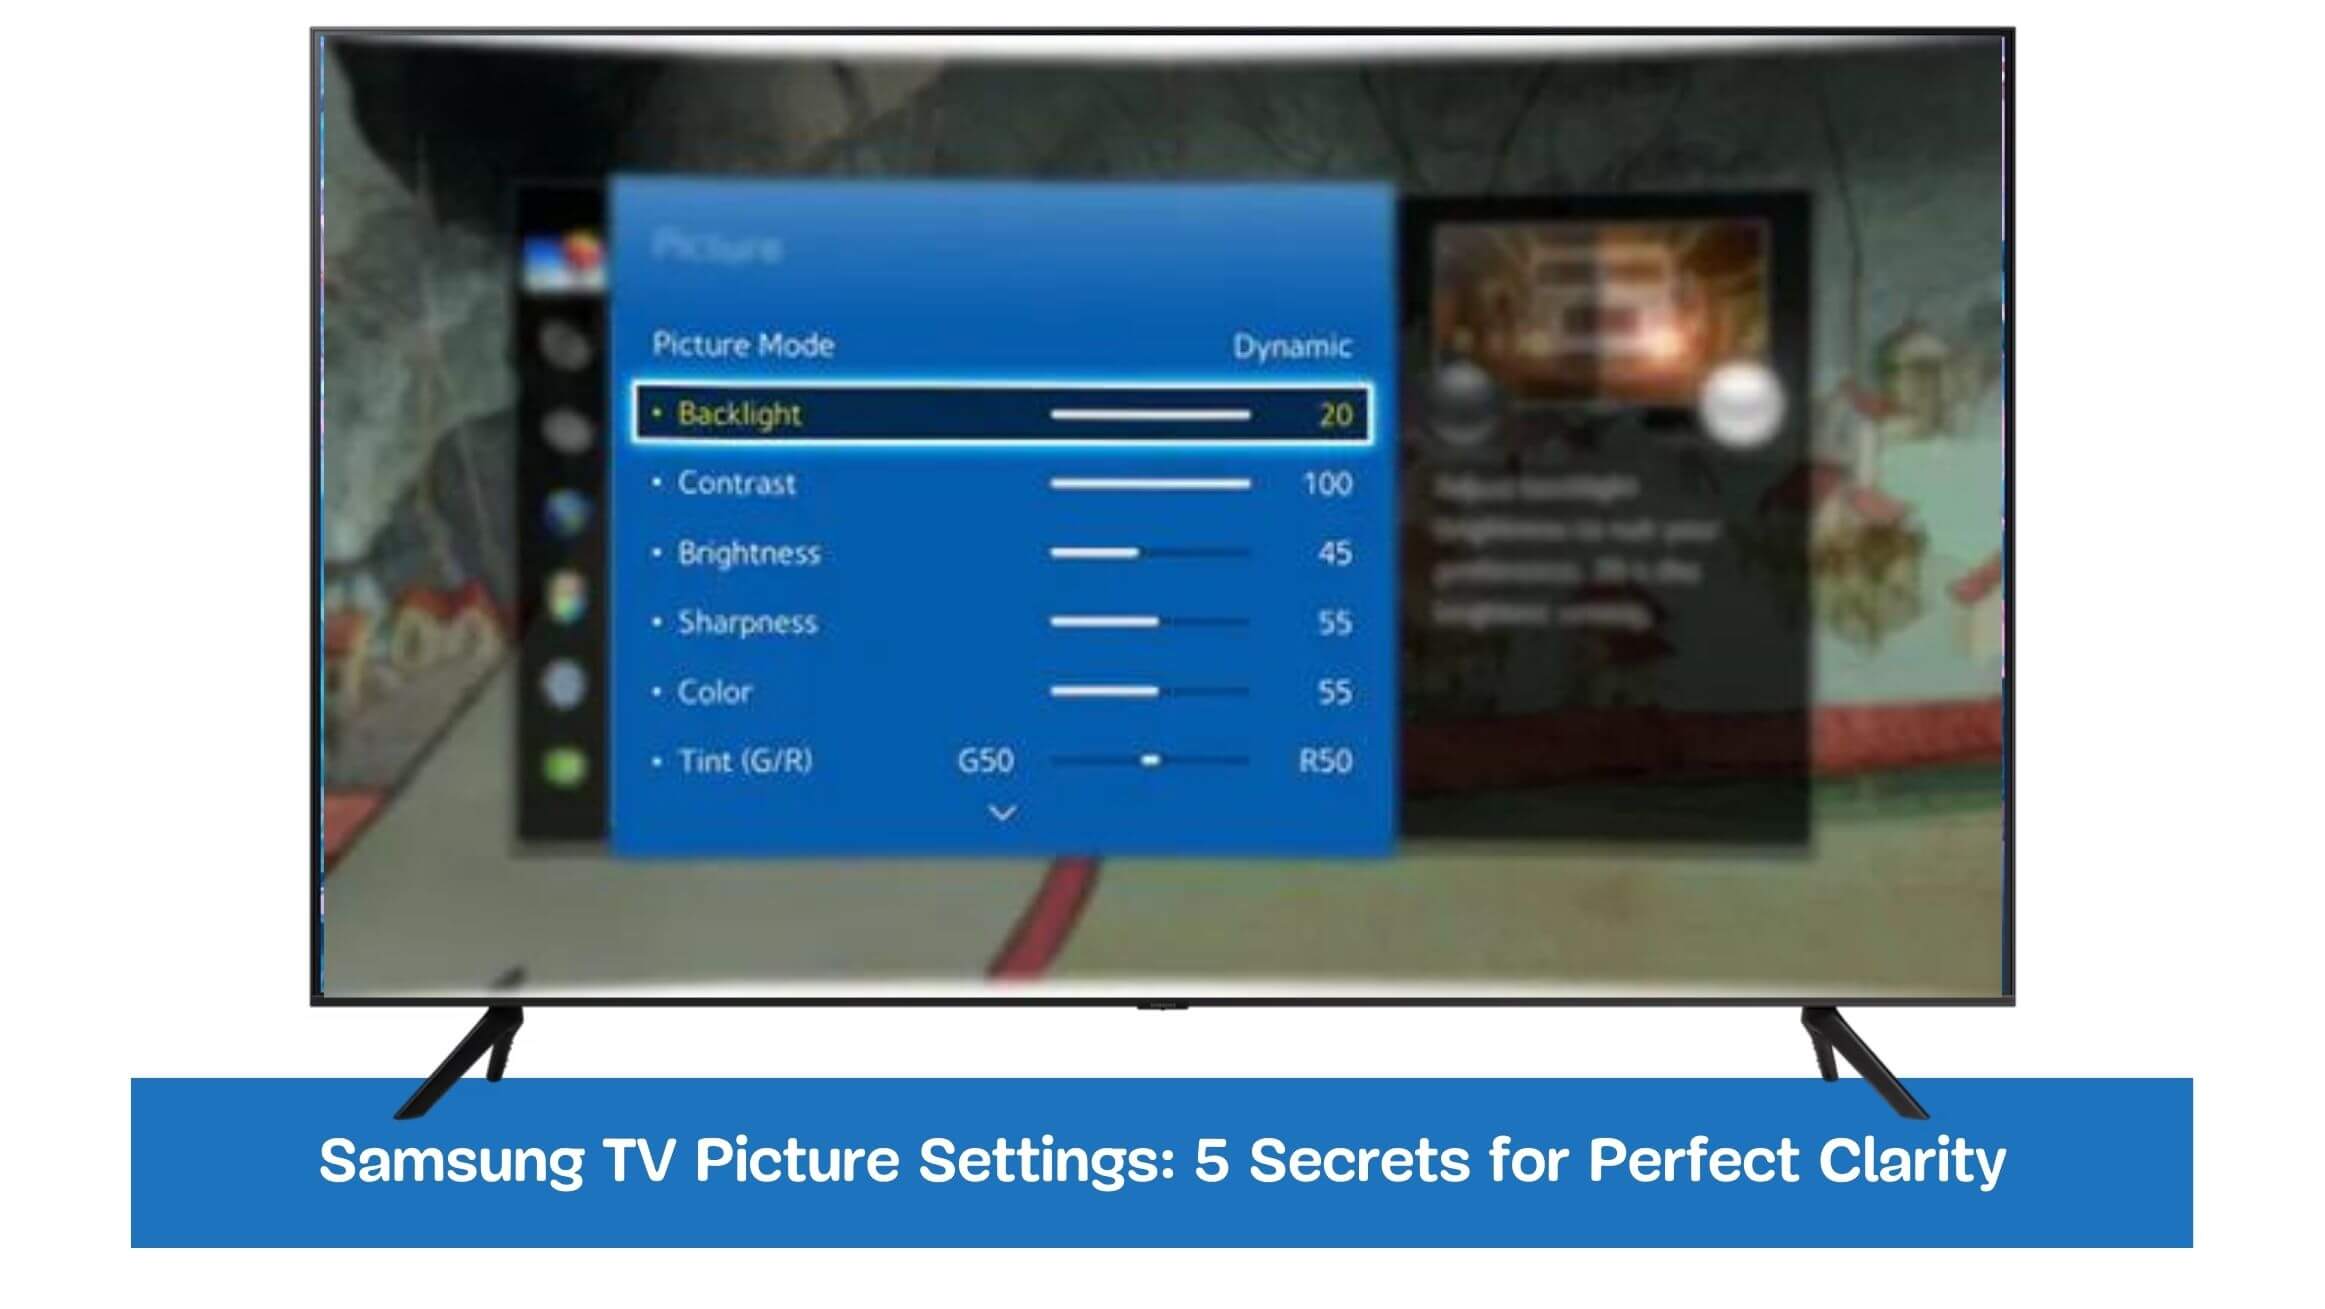 Samsung TV Picture Settings: 5 Secrets for Perfect Clarity